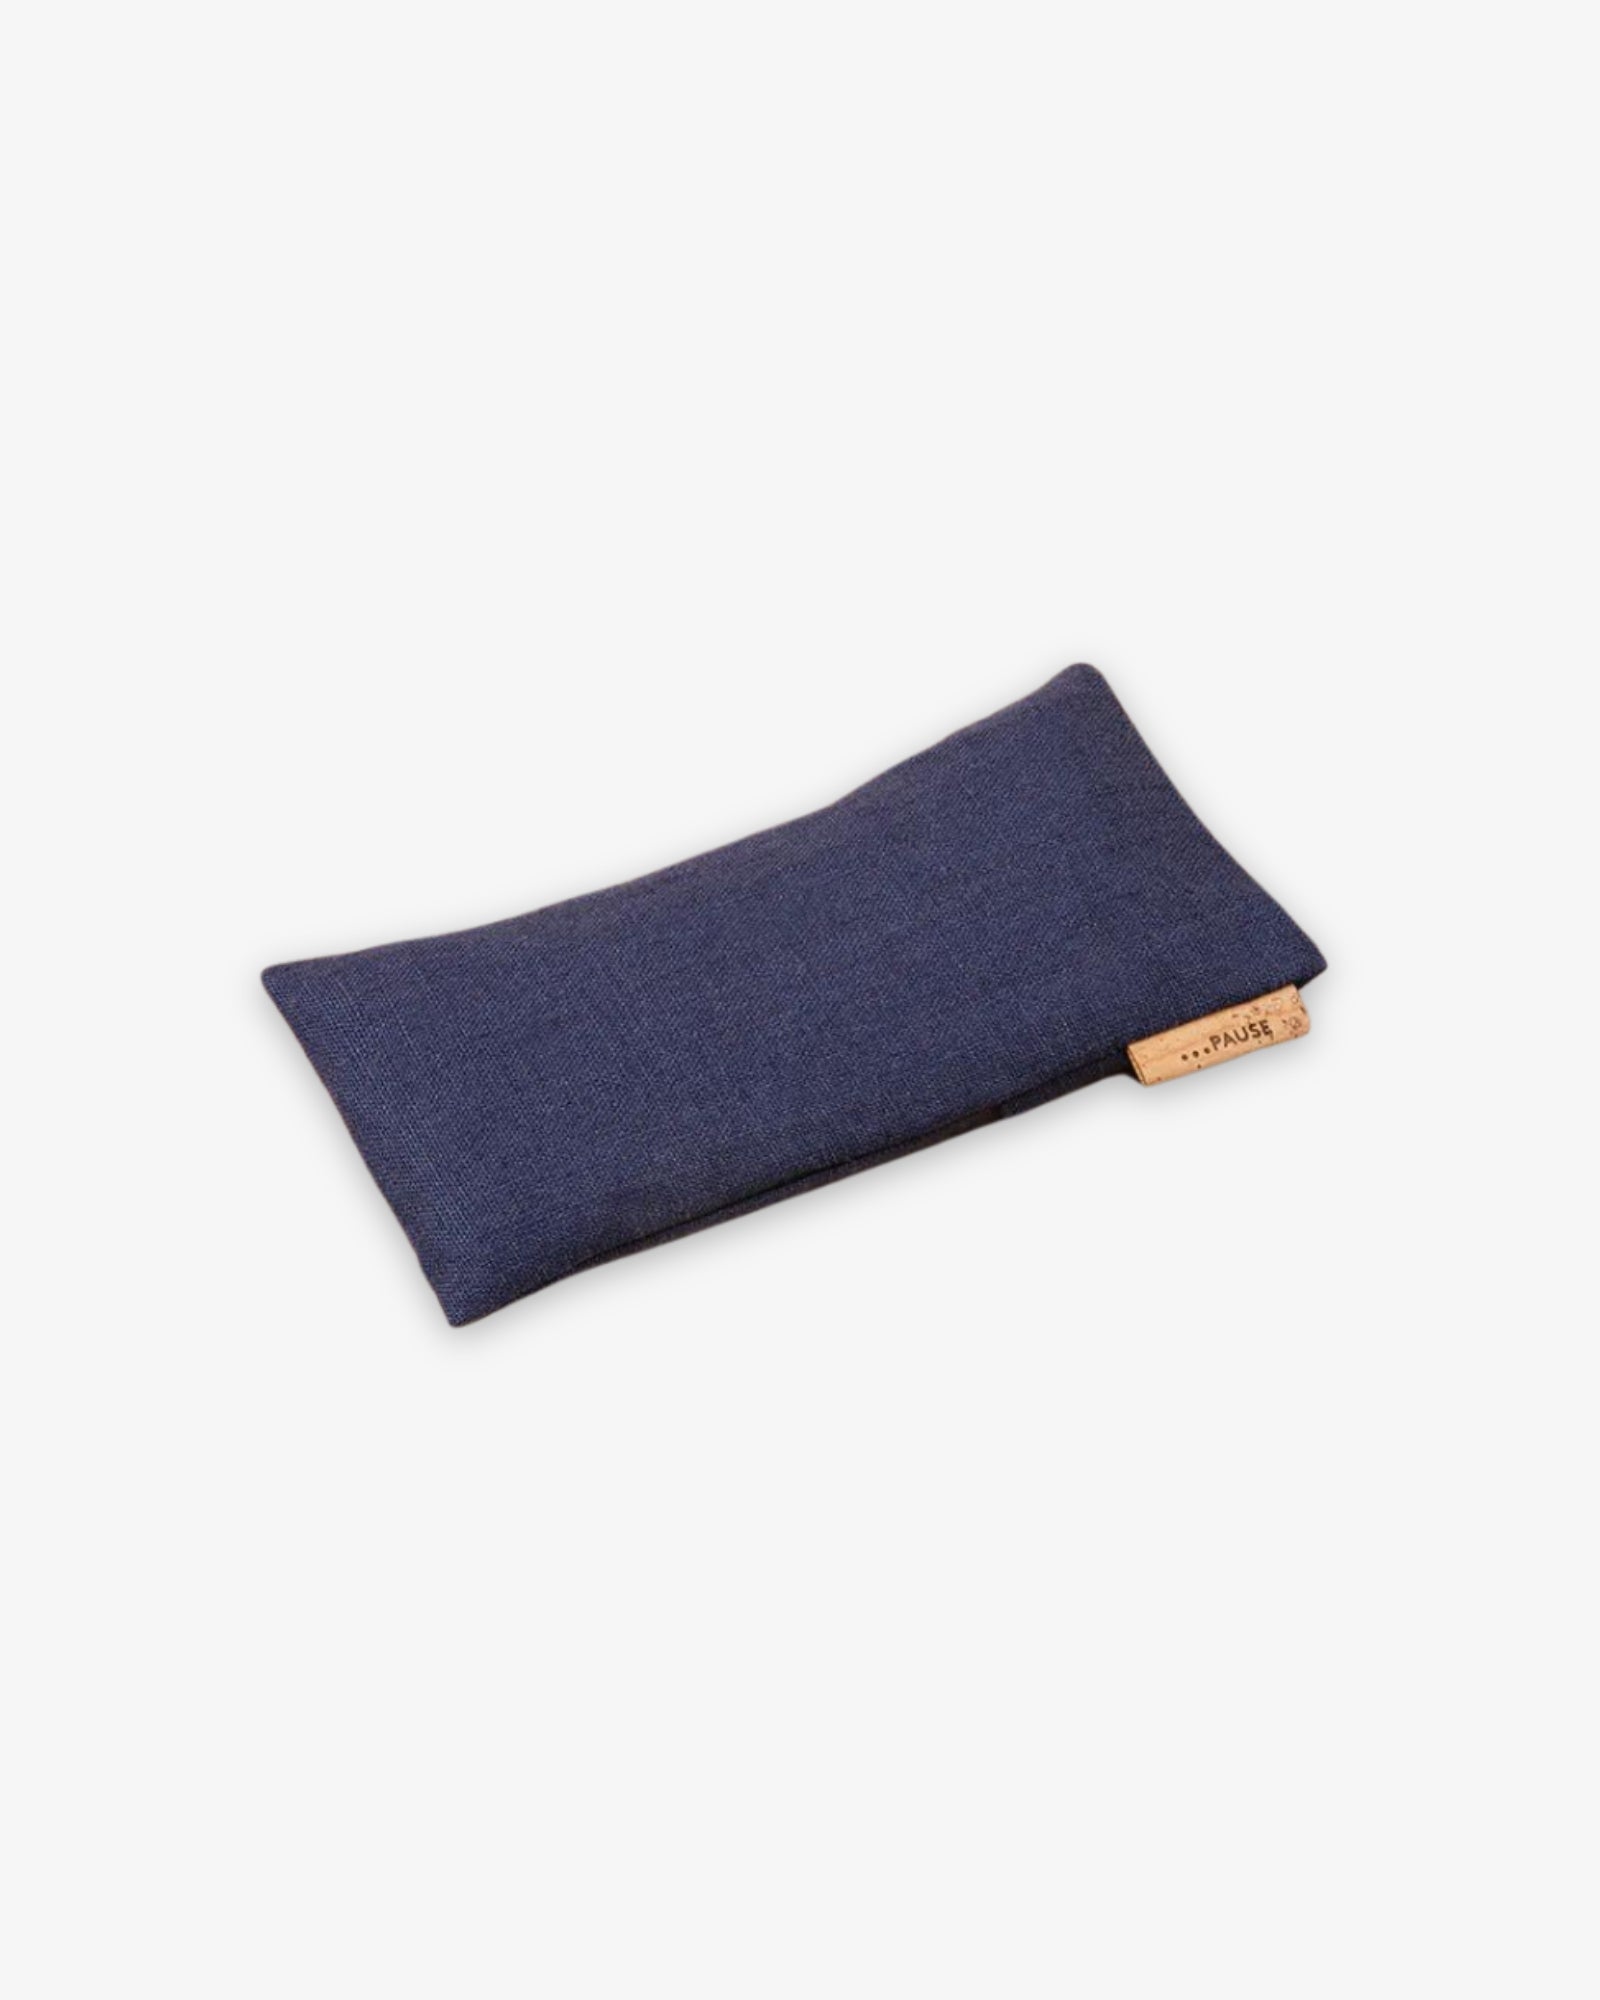 Lavender Eye Pillows by Olive & Olde's